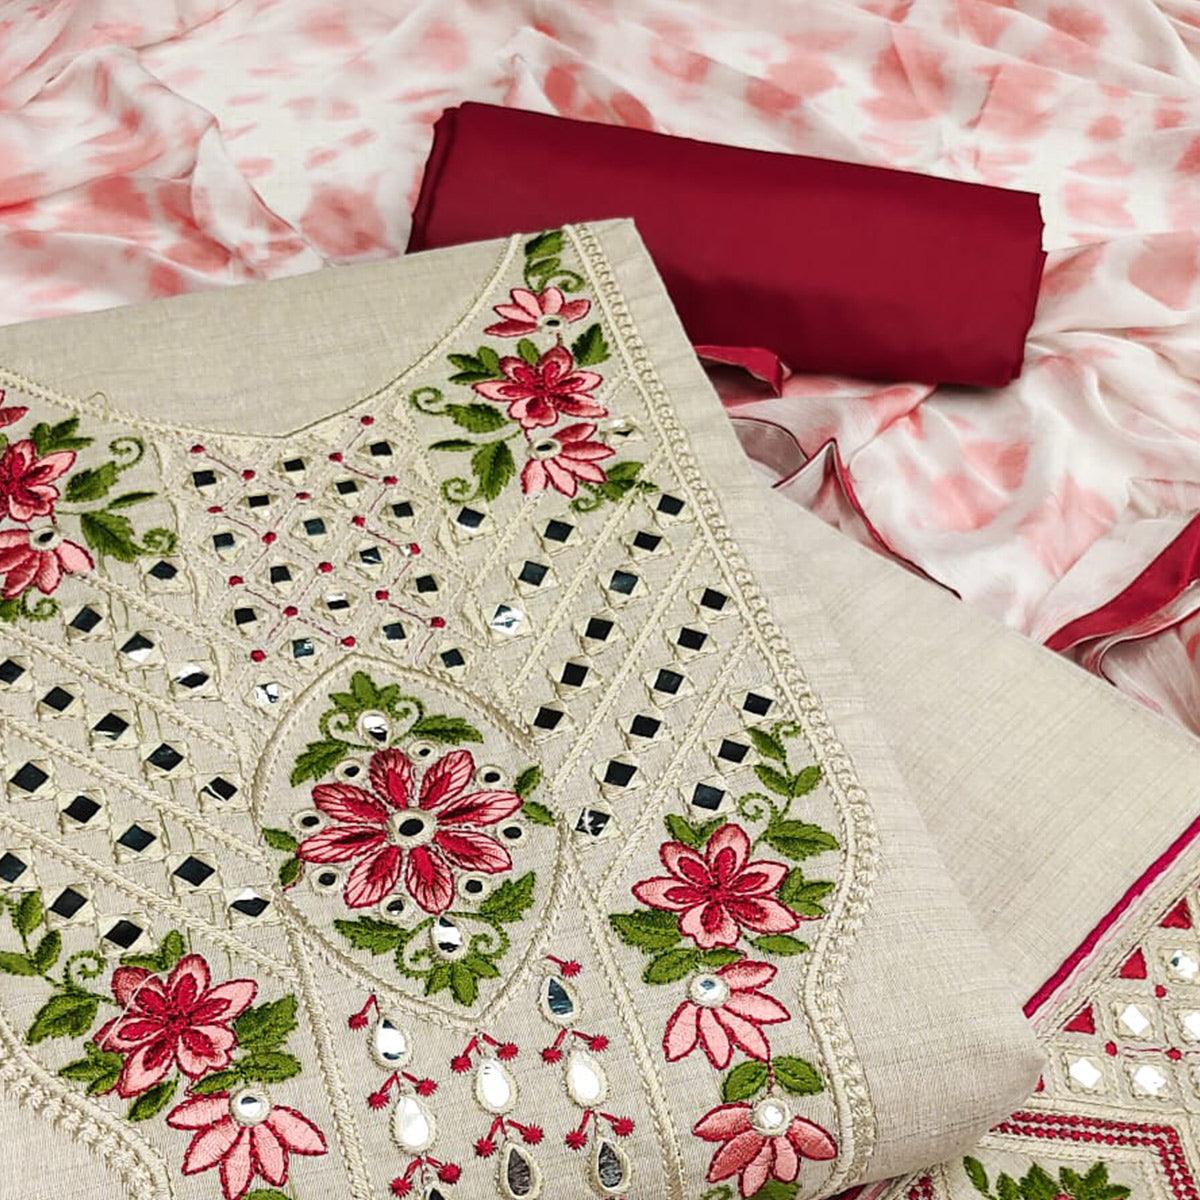 Cream-Maroon Festive Wear Floral Embroidery With Mirror Work Cotton Dress Material - Peachmode